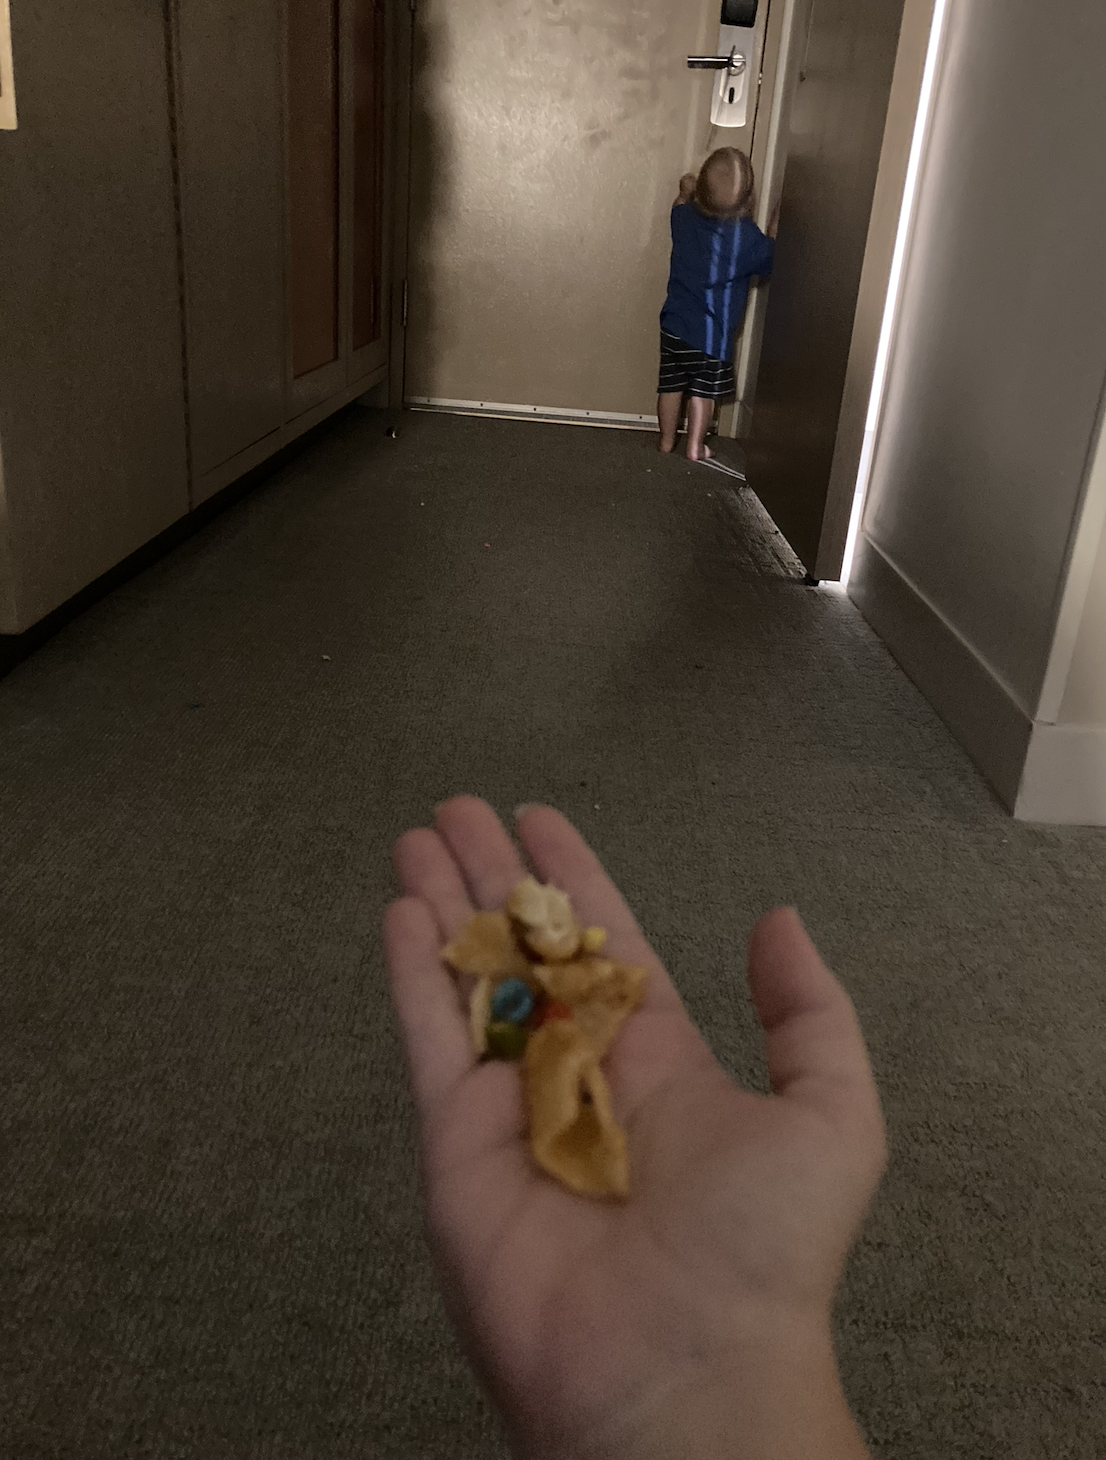 A child wearing a blue jacket is at the end of a hallway, trying to open a door. An adult hand in the foreground holds snack pieces